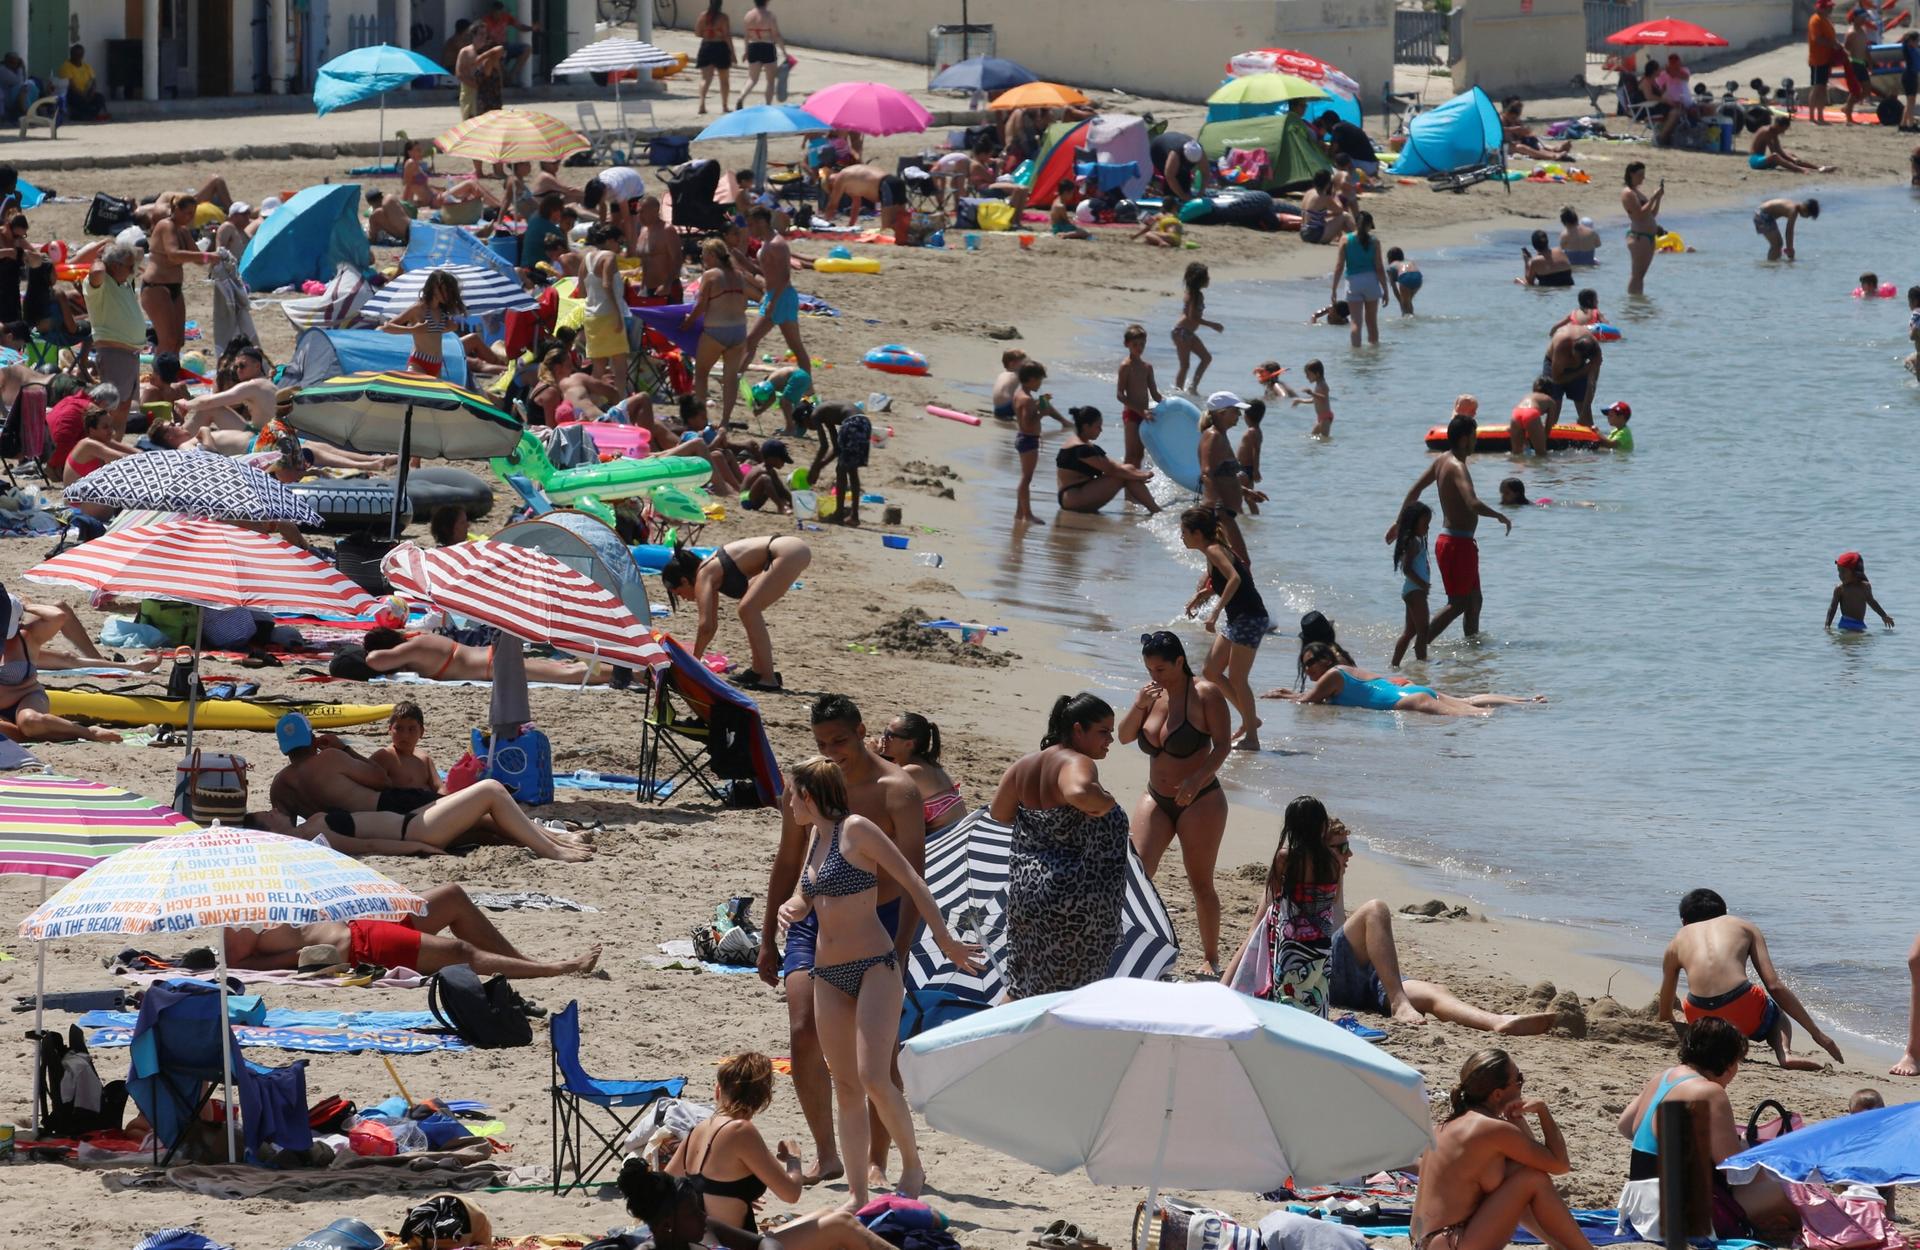 A stretch of crowded beach with lots of colorful umbrellas and people in bikinis